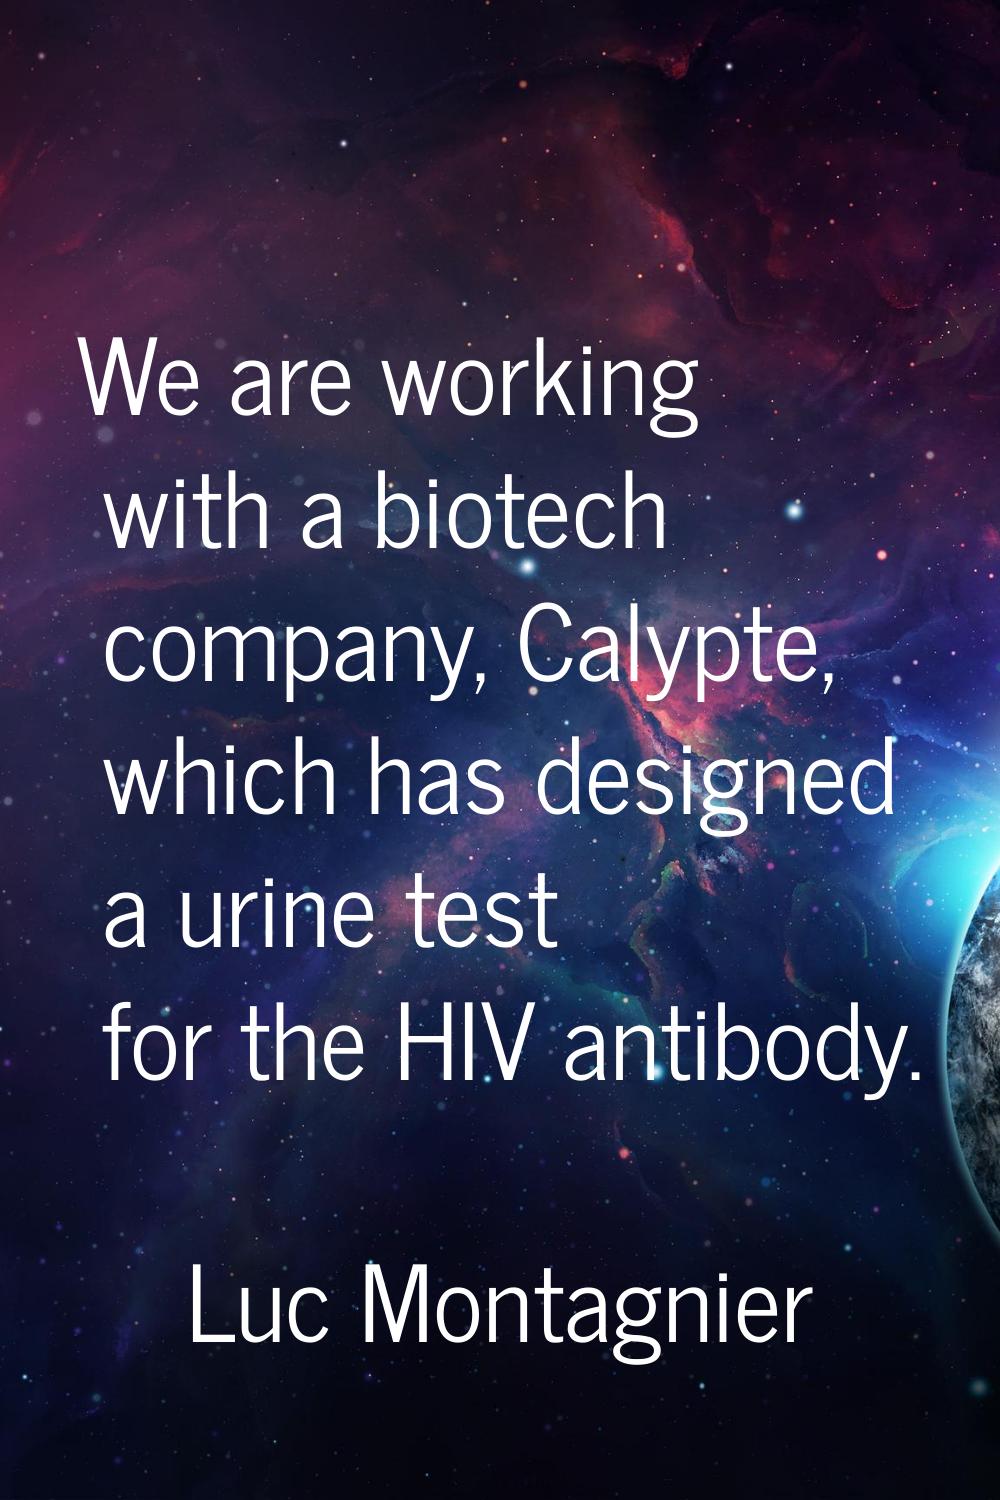 We are working with a biotech company, Calypte, which has designed a urine test for the HIV antibod